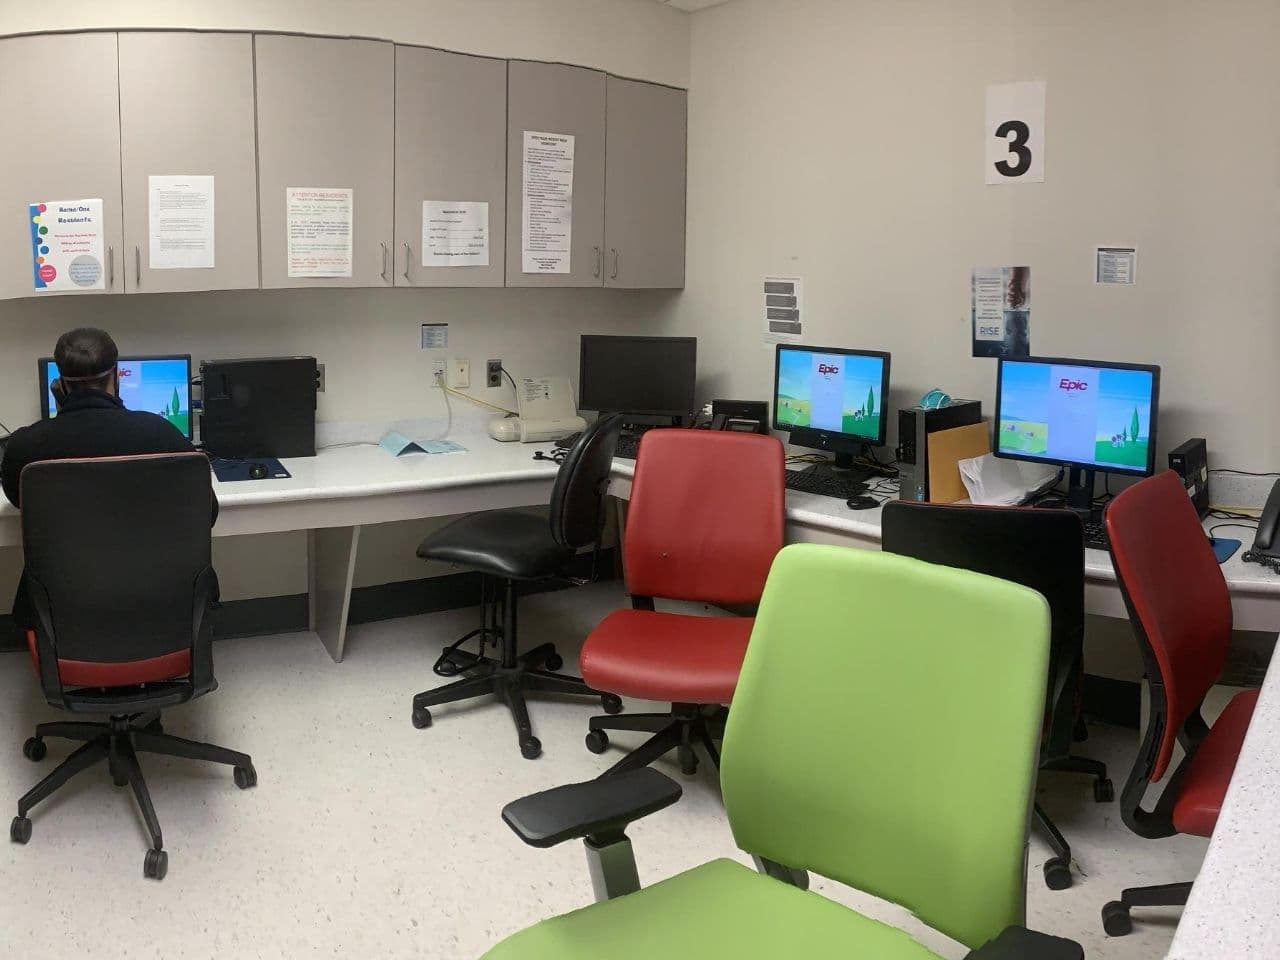 A doctor's room has multiple computer stations, chair, and storage cabinets.